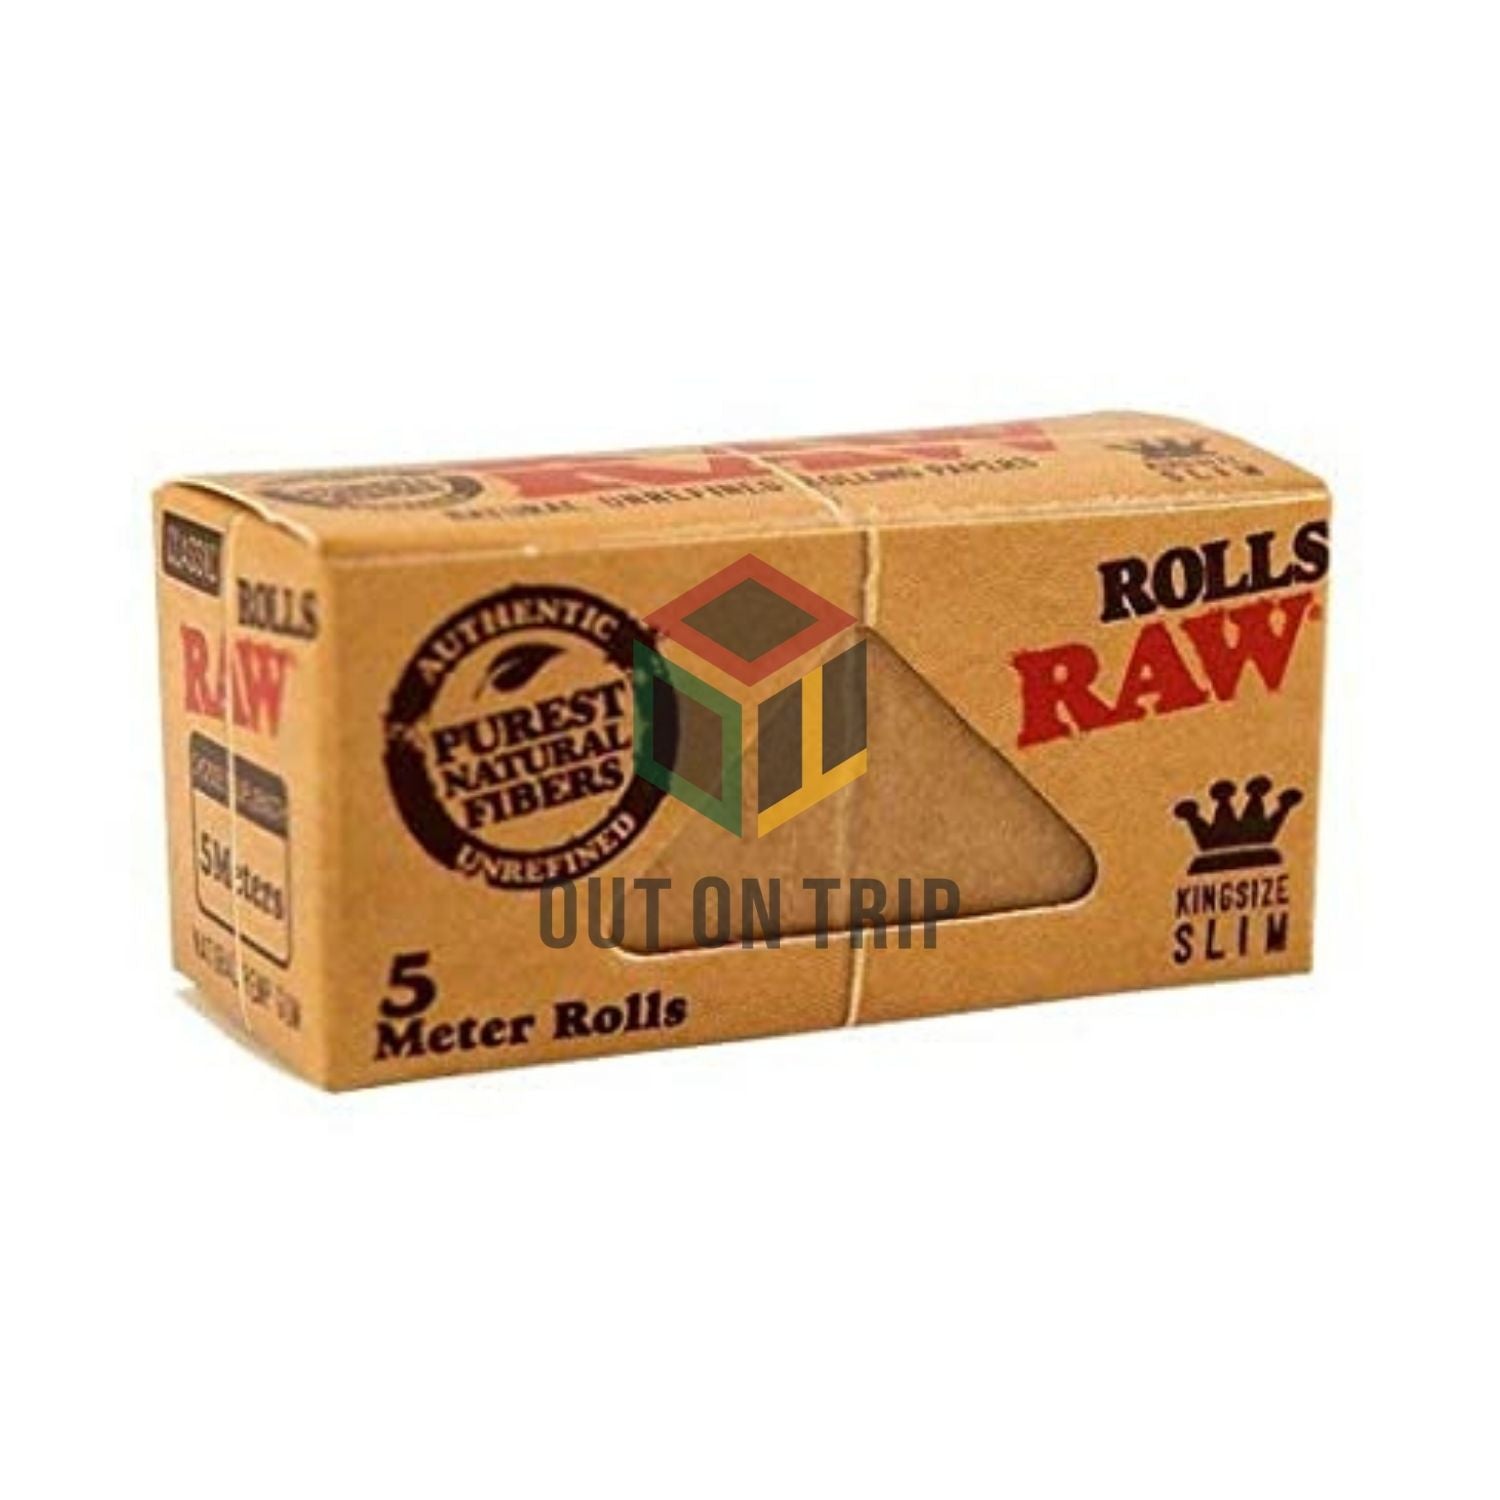 RAW Classic Roll - 5 meter